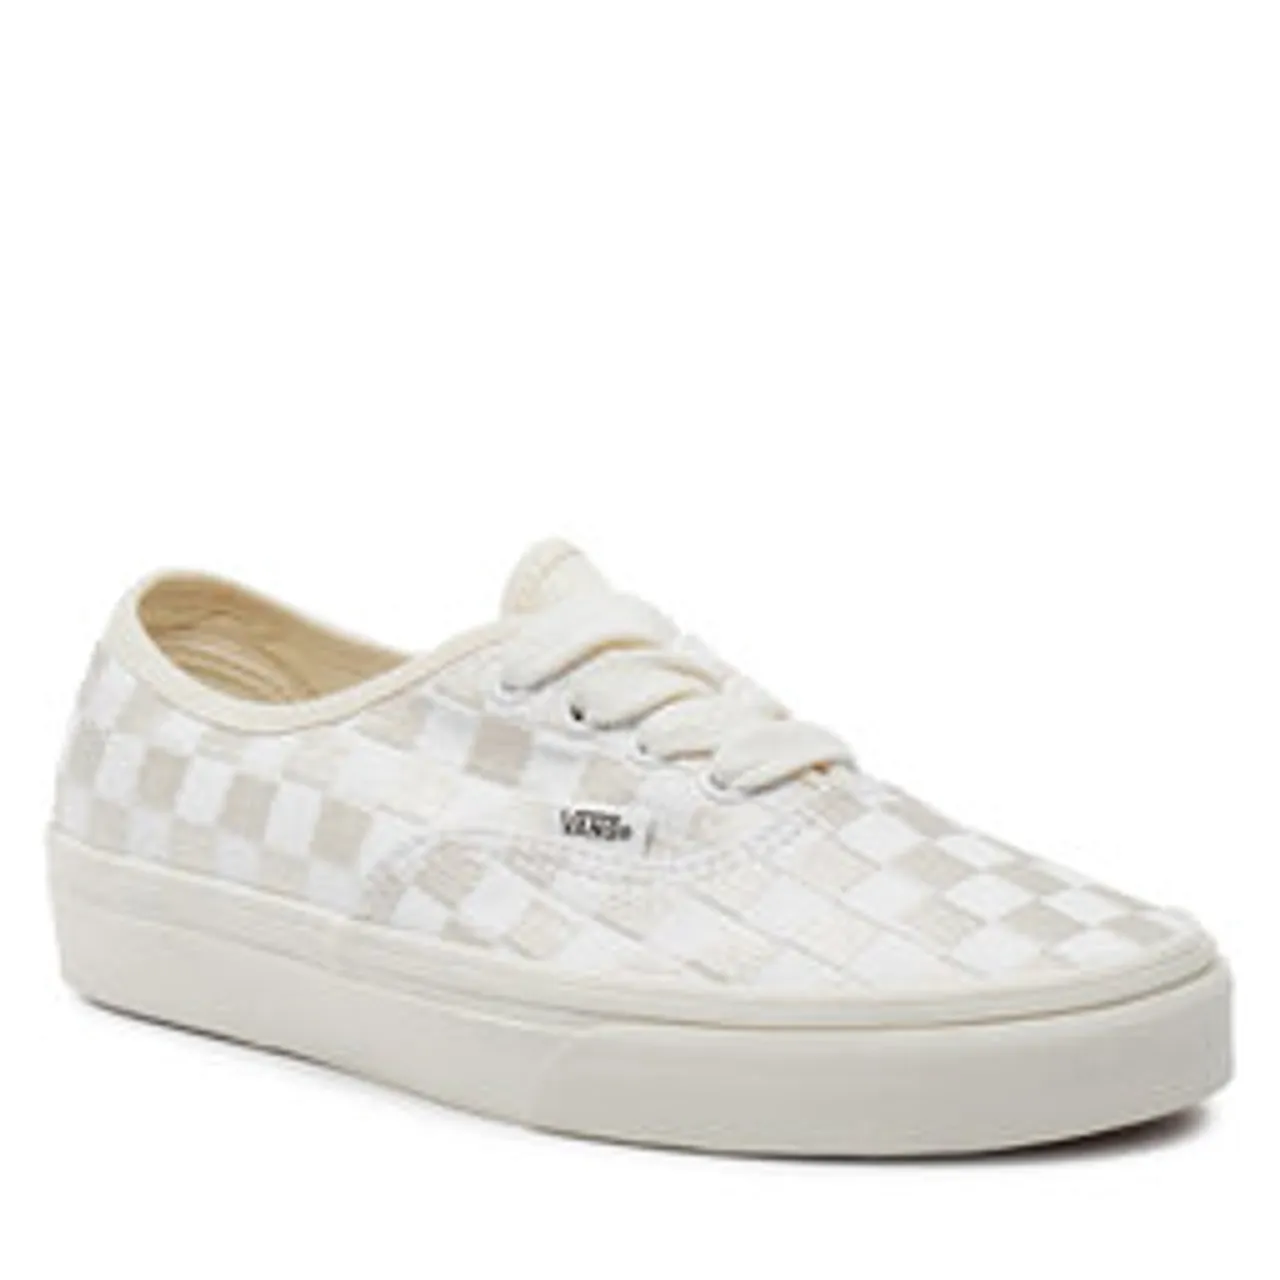 Sneakers aus Stoff Vans Authentic VN0009PVCJD1 White